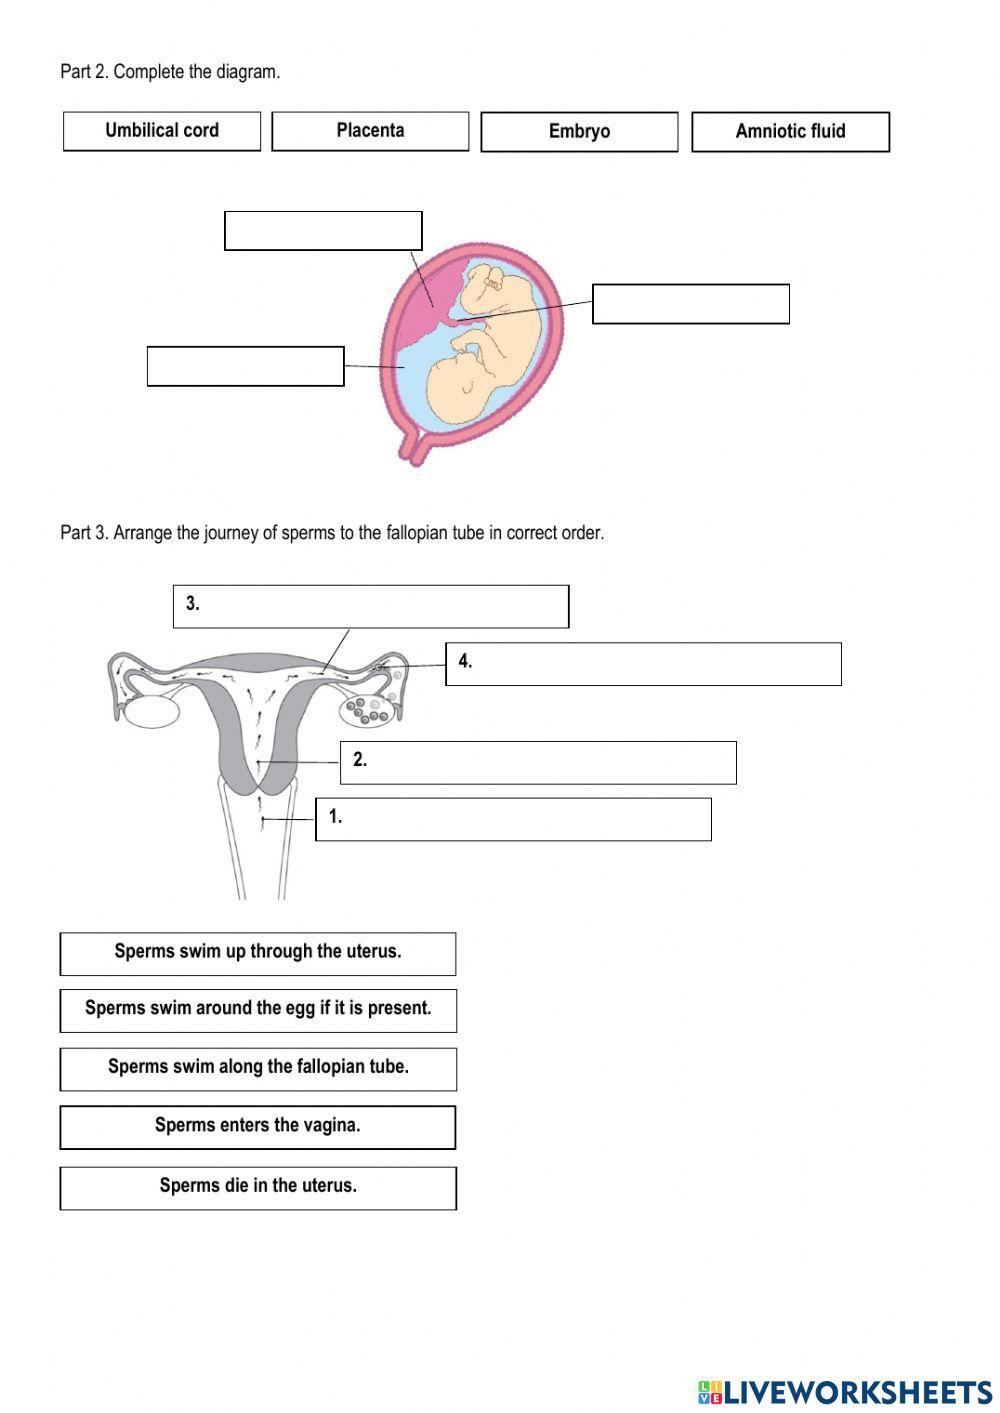 Menstrual cycle and Pregnancy